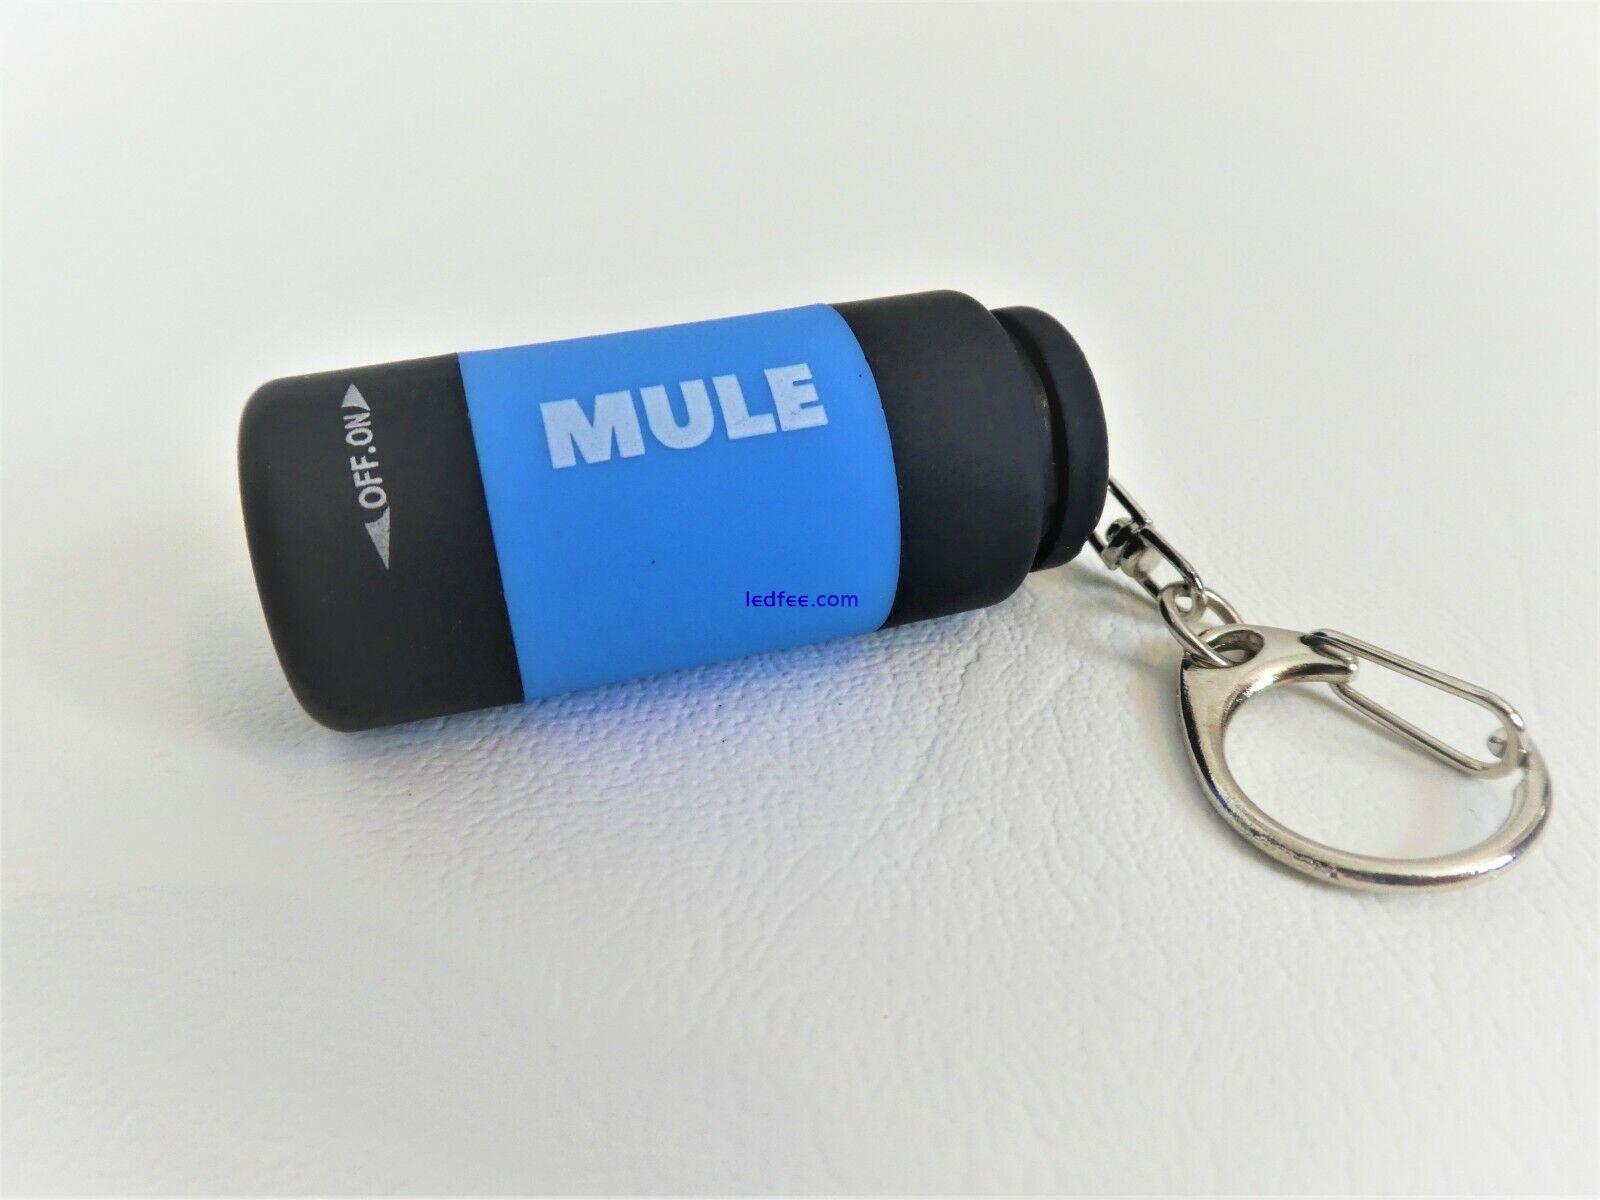 MULE Blue USB Rechargeable water resistant inspection torch key-ring EDC 2 